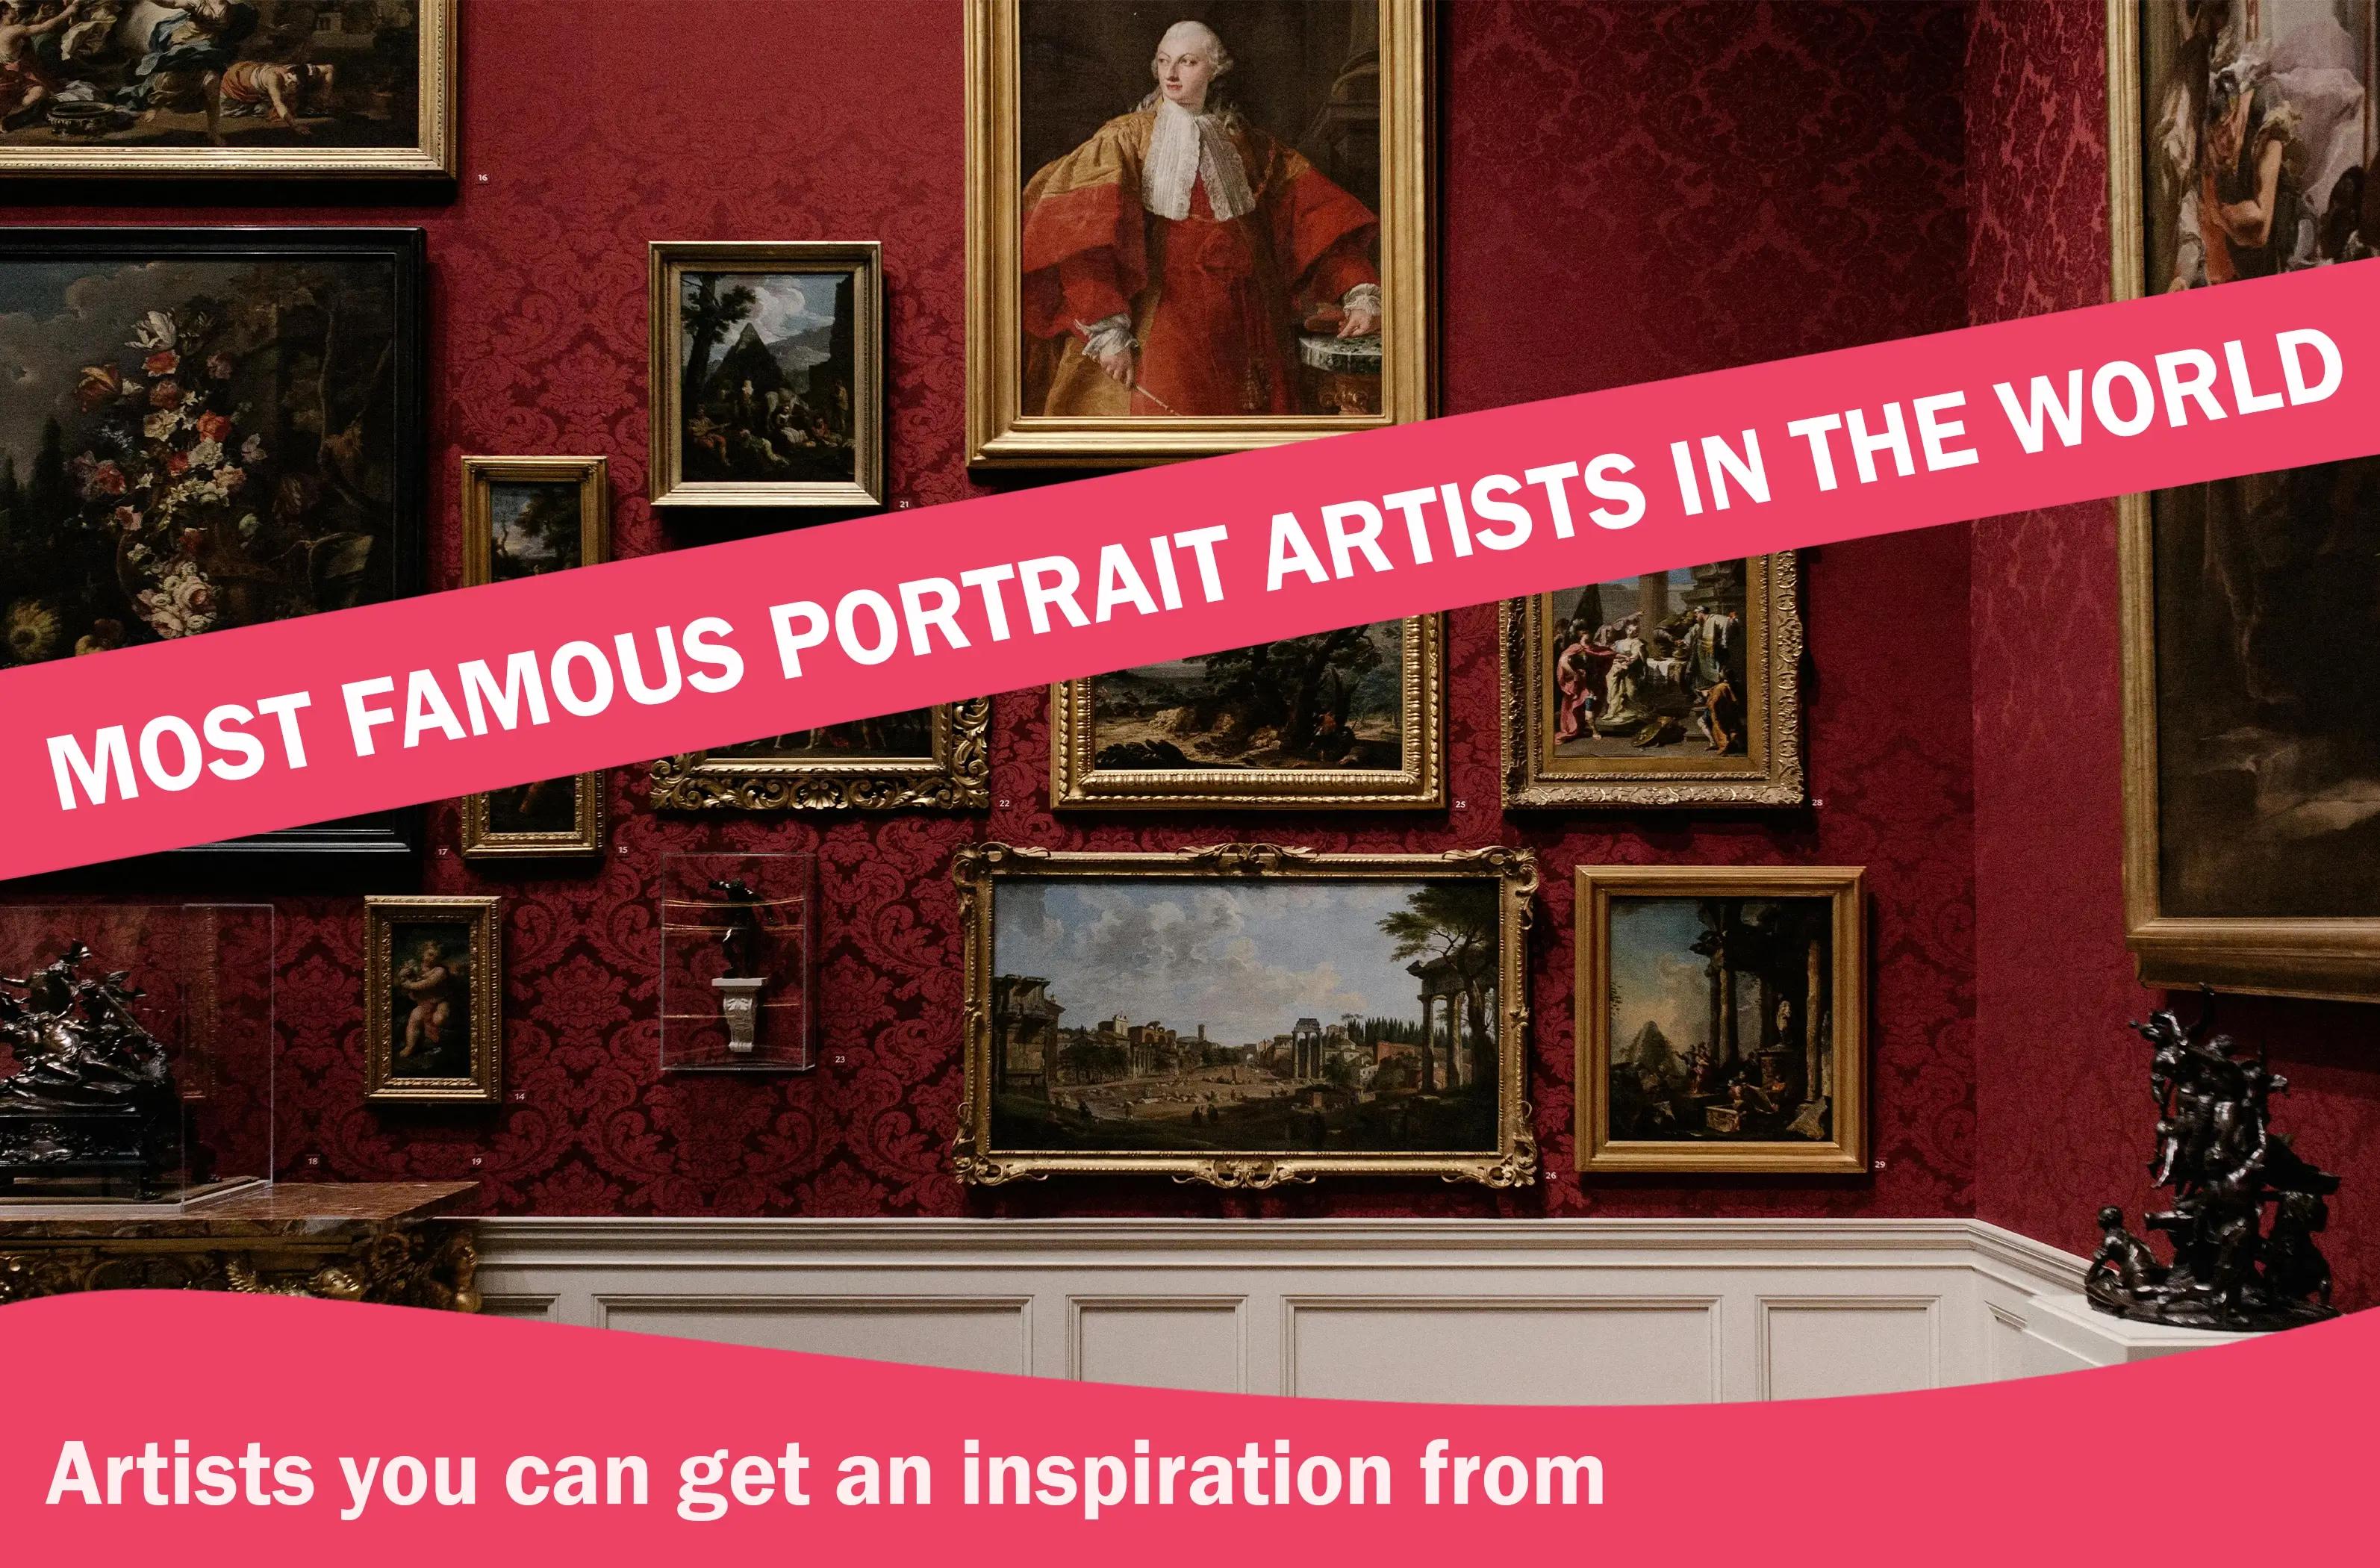 Most Famous Portrait Artists in the World to Gather Inspiration